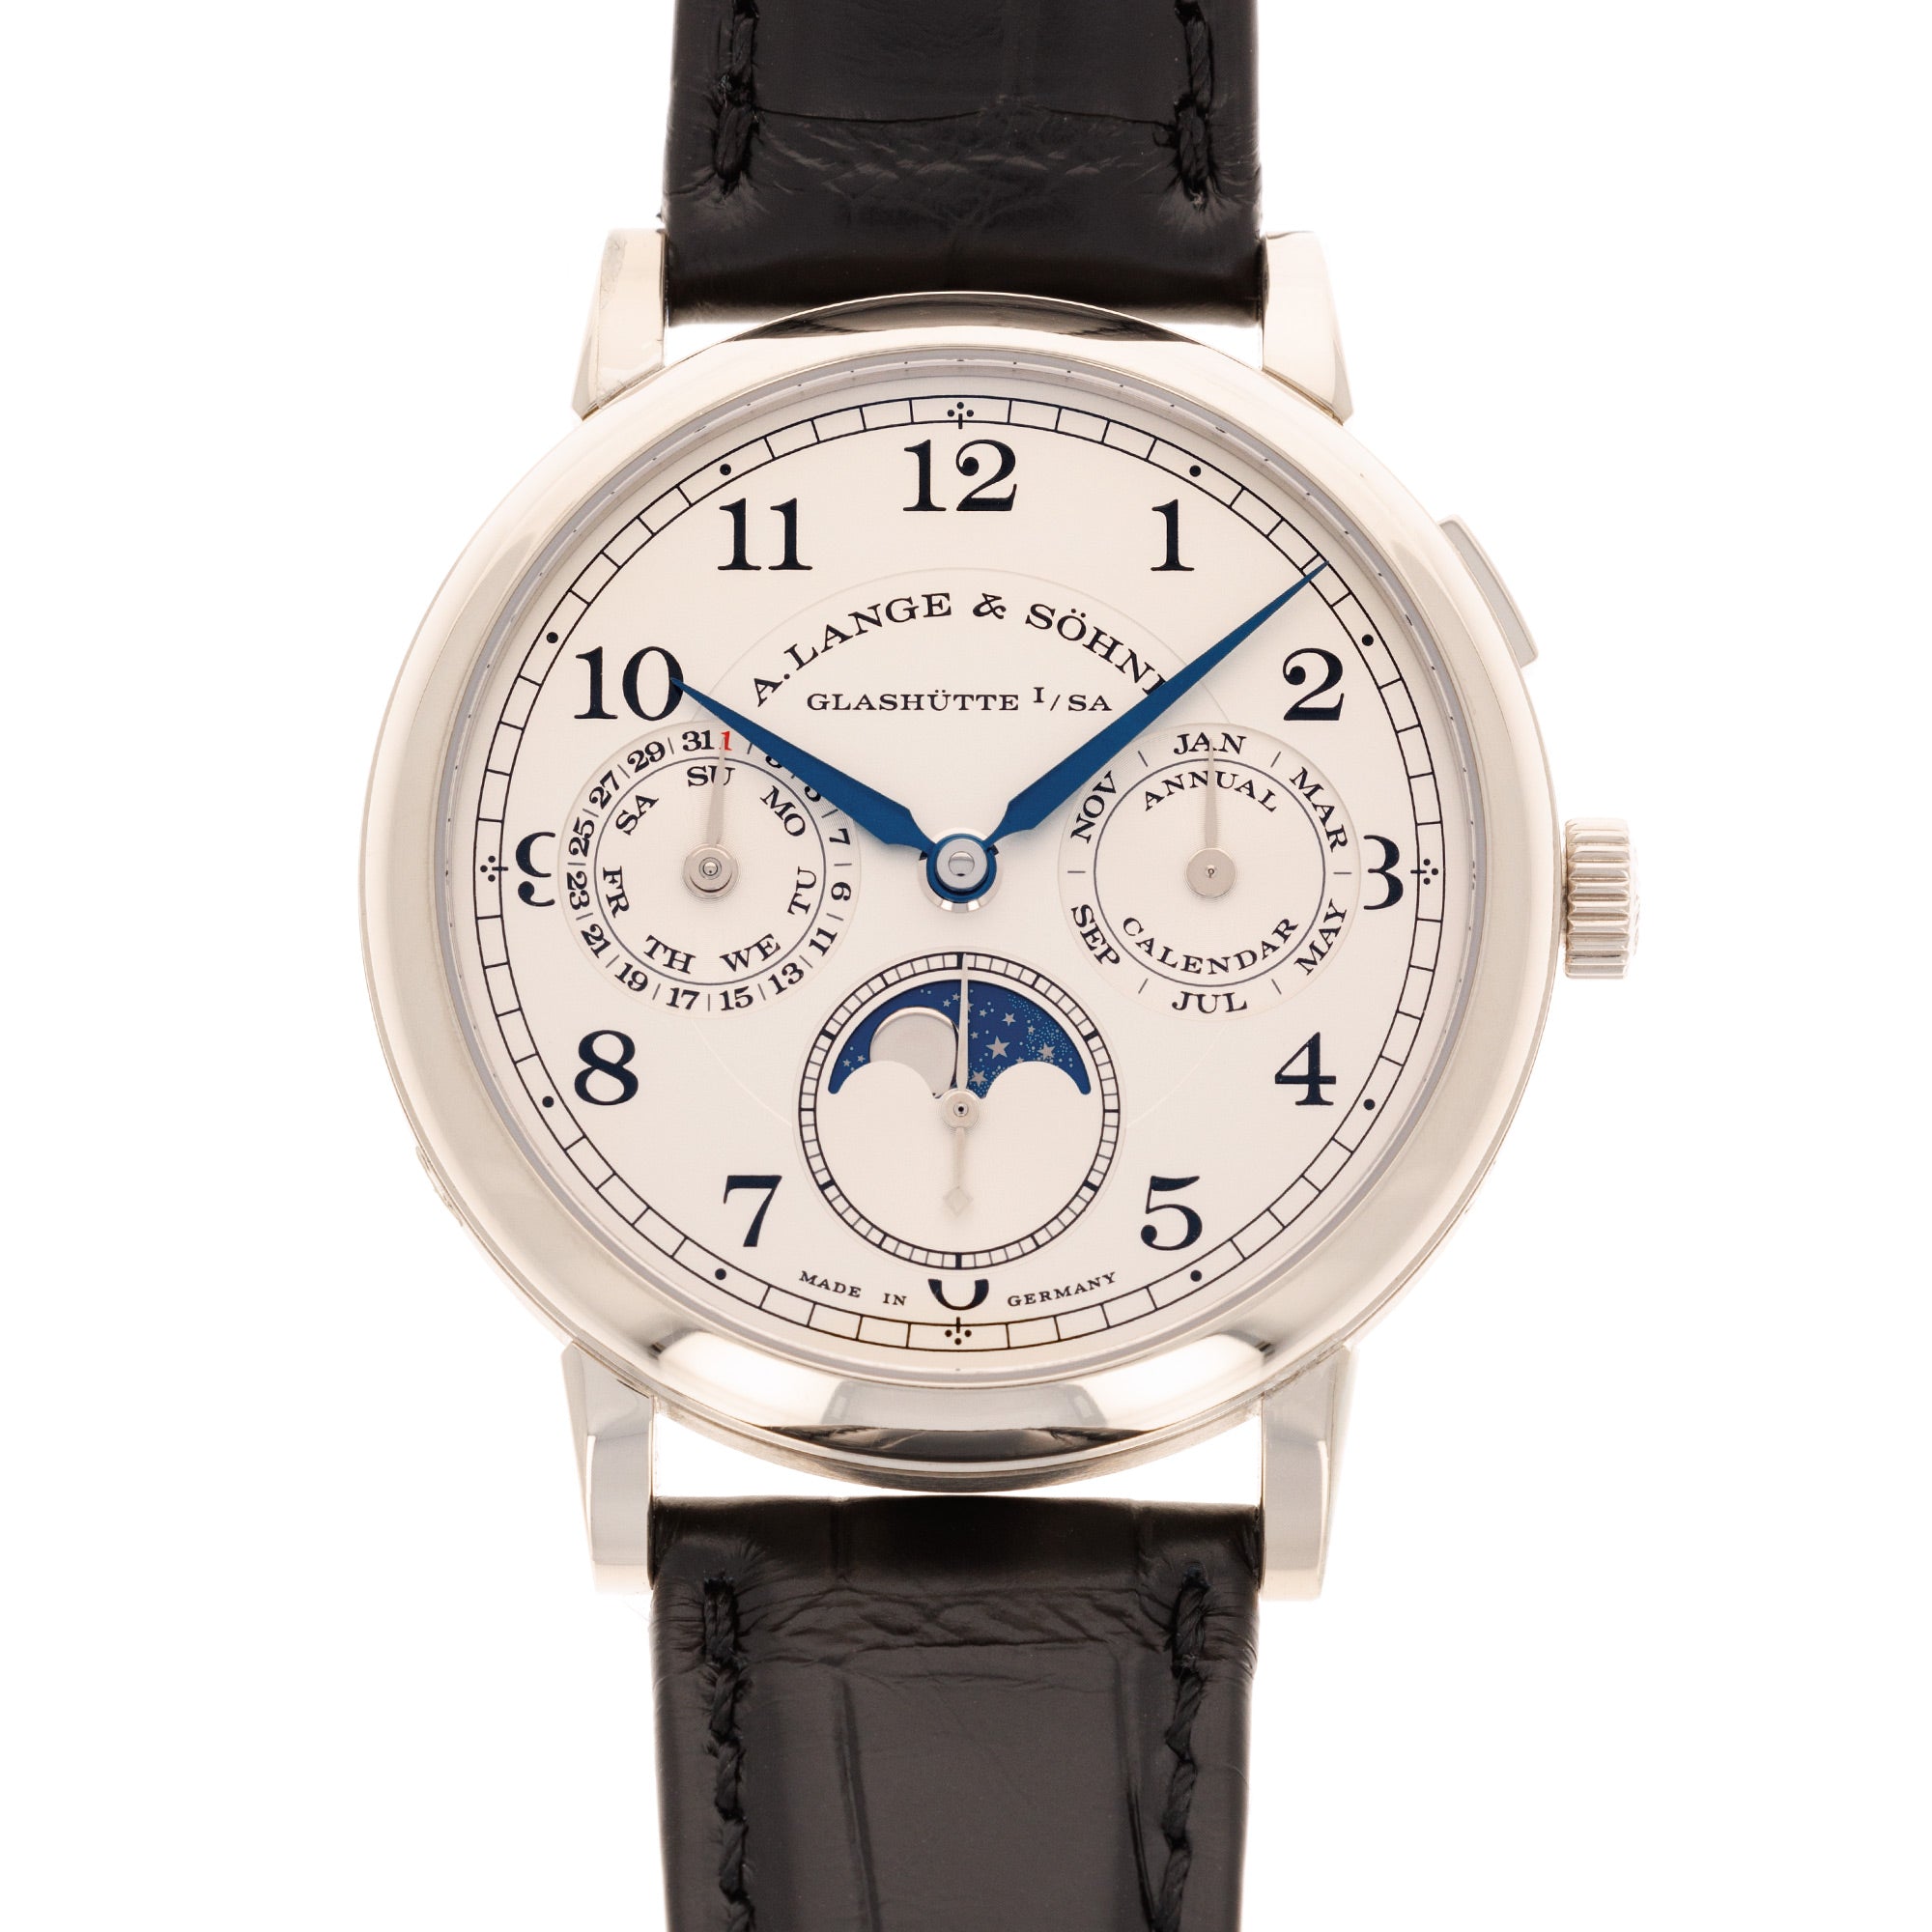 A. Lange & Sohne - A. Lange & Sohne White Gold 1815 Annual Calendar Watch Ref. 238.026 - The Keystone Watches